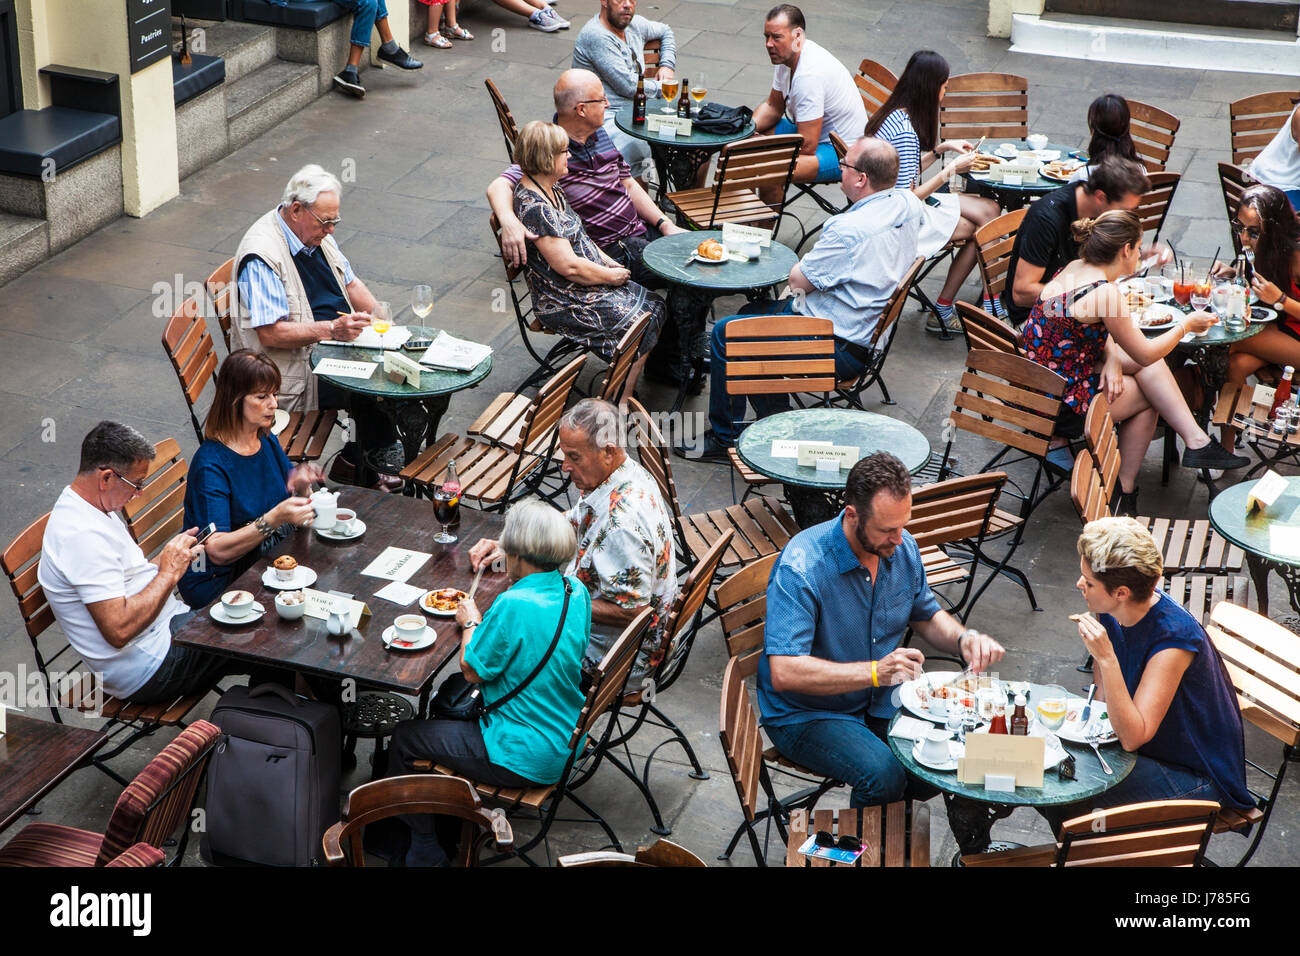 People sitting at a cafe in Covent Garden Market in London. Stock Photo